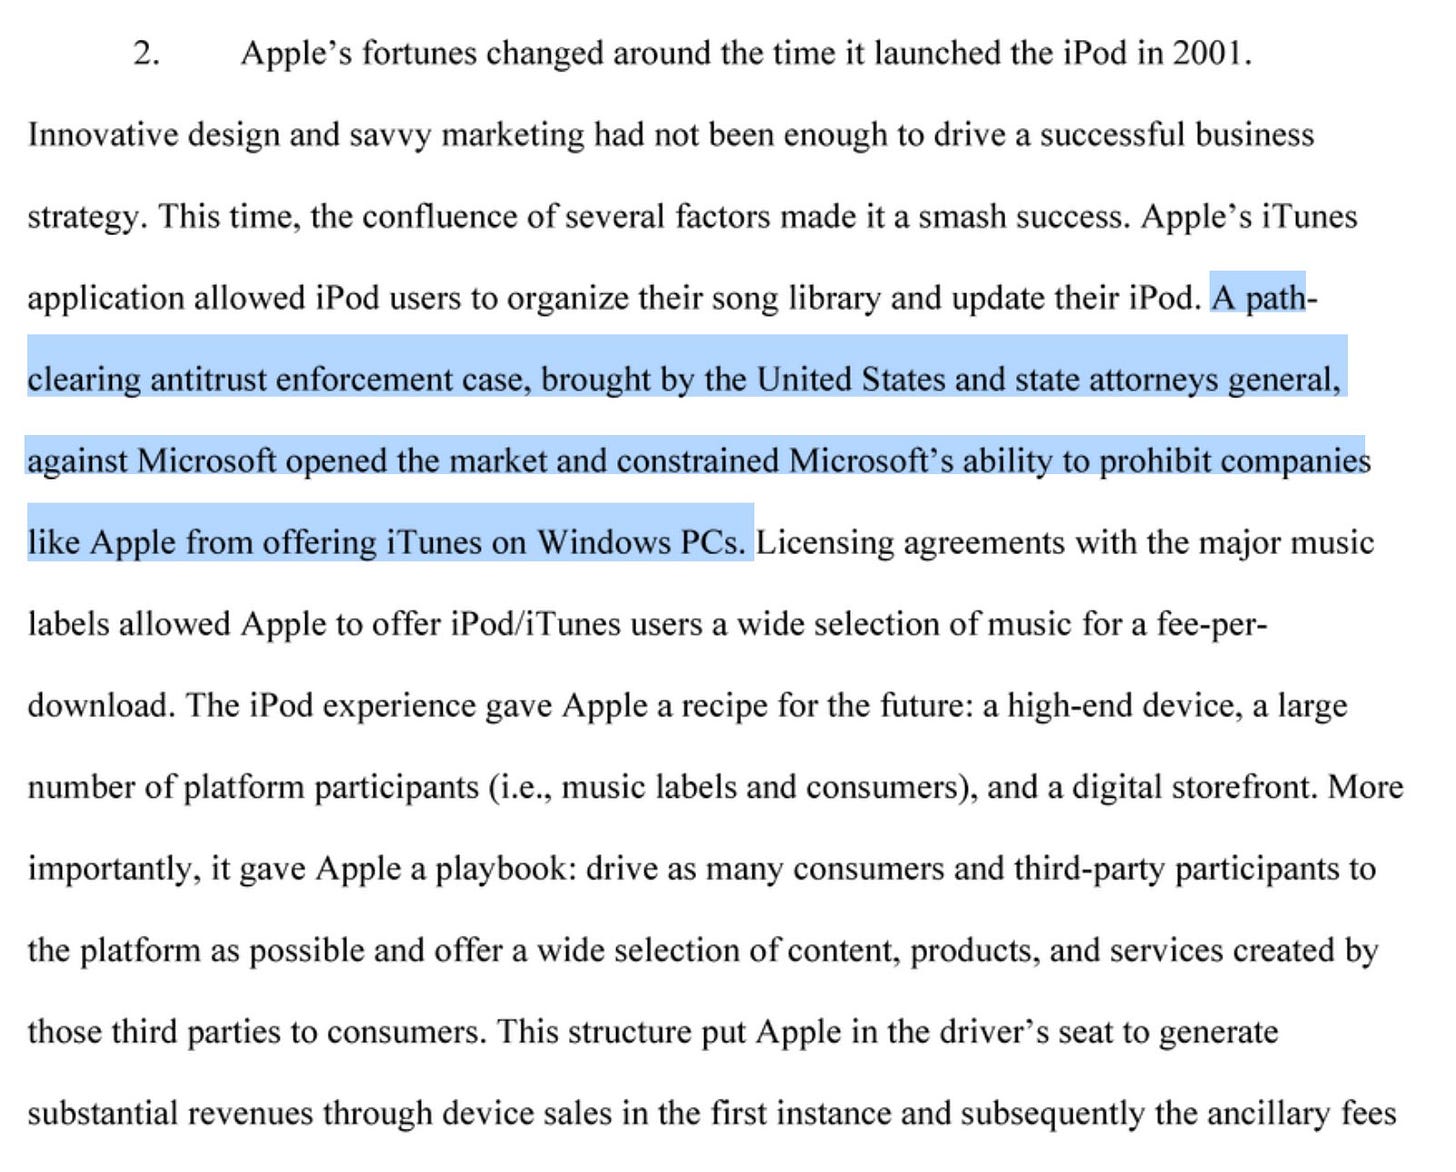 A path
clearing antitrust enforcement case,brought by the United States and state attorneys general, against Microsoft opened the market and constrained Microsoft's ability to prohibit companies
likeApple fromoffering iTunes onWindows PCs.